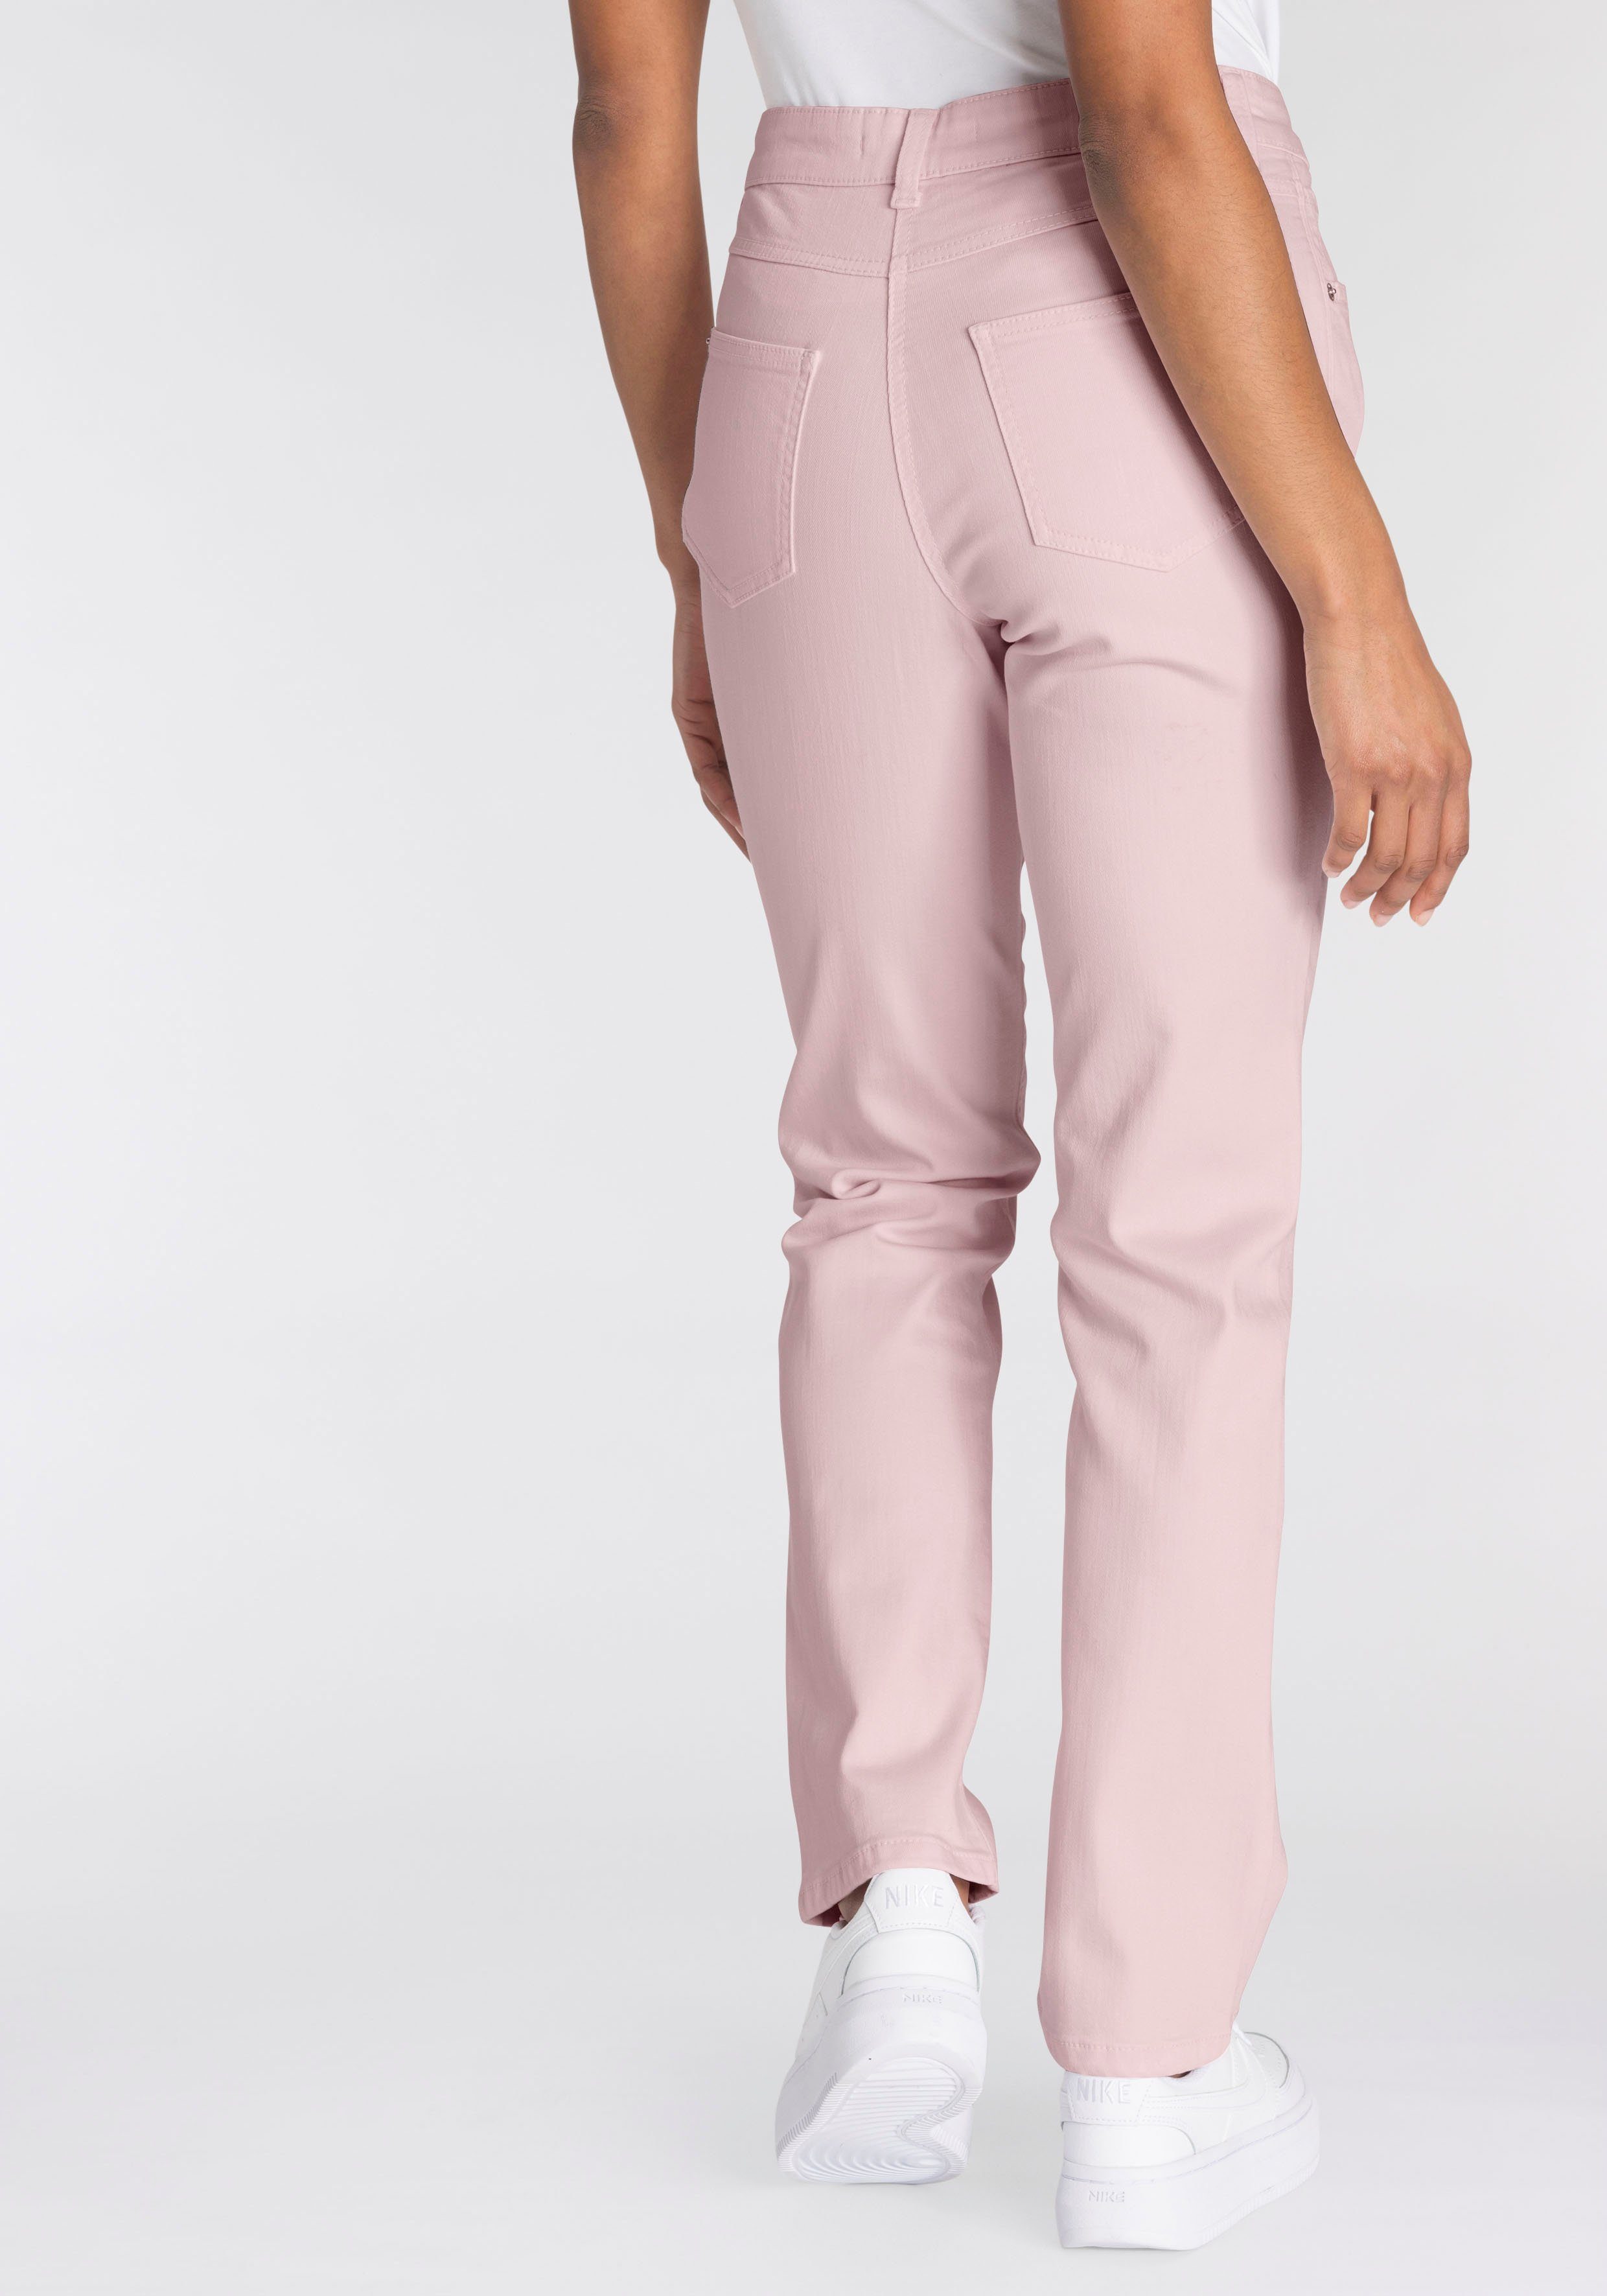 Rosa Jeans online kaufen » Jeans in pink | OTTO